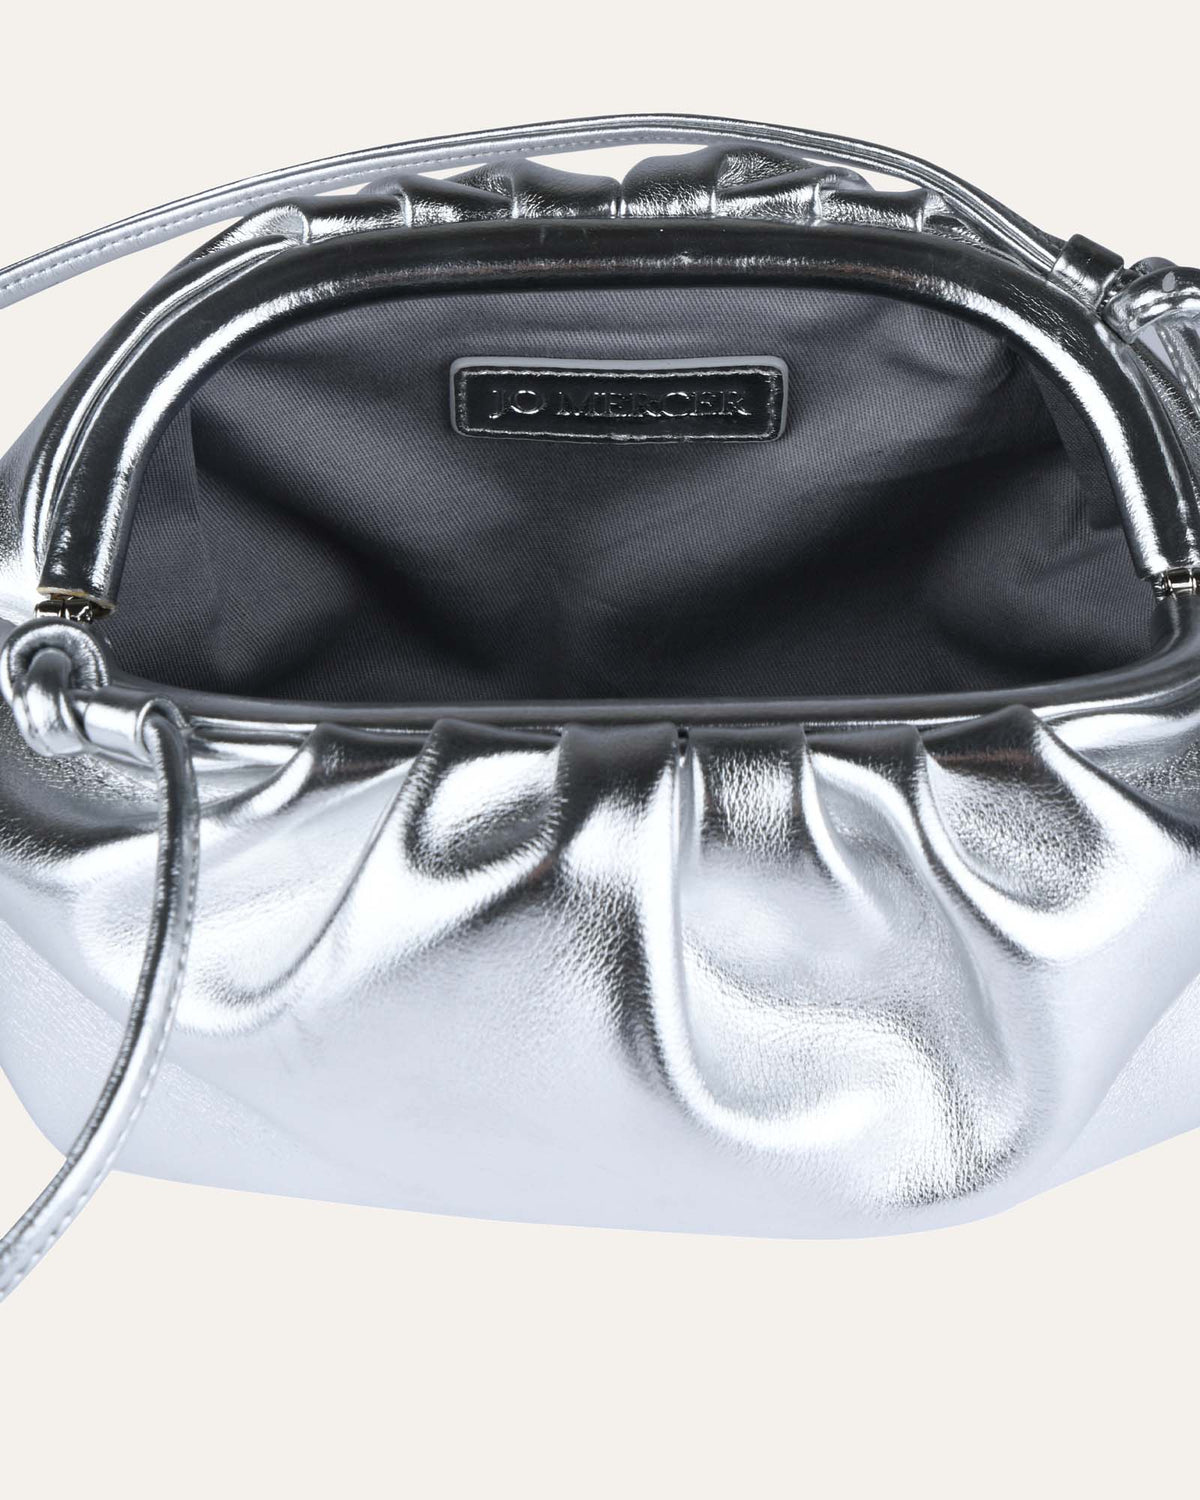 BAMBIE CROSS BODY BAG SILVER LEATHER